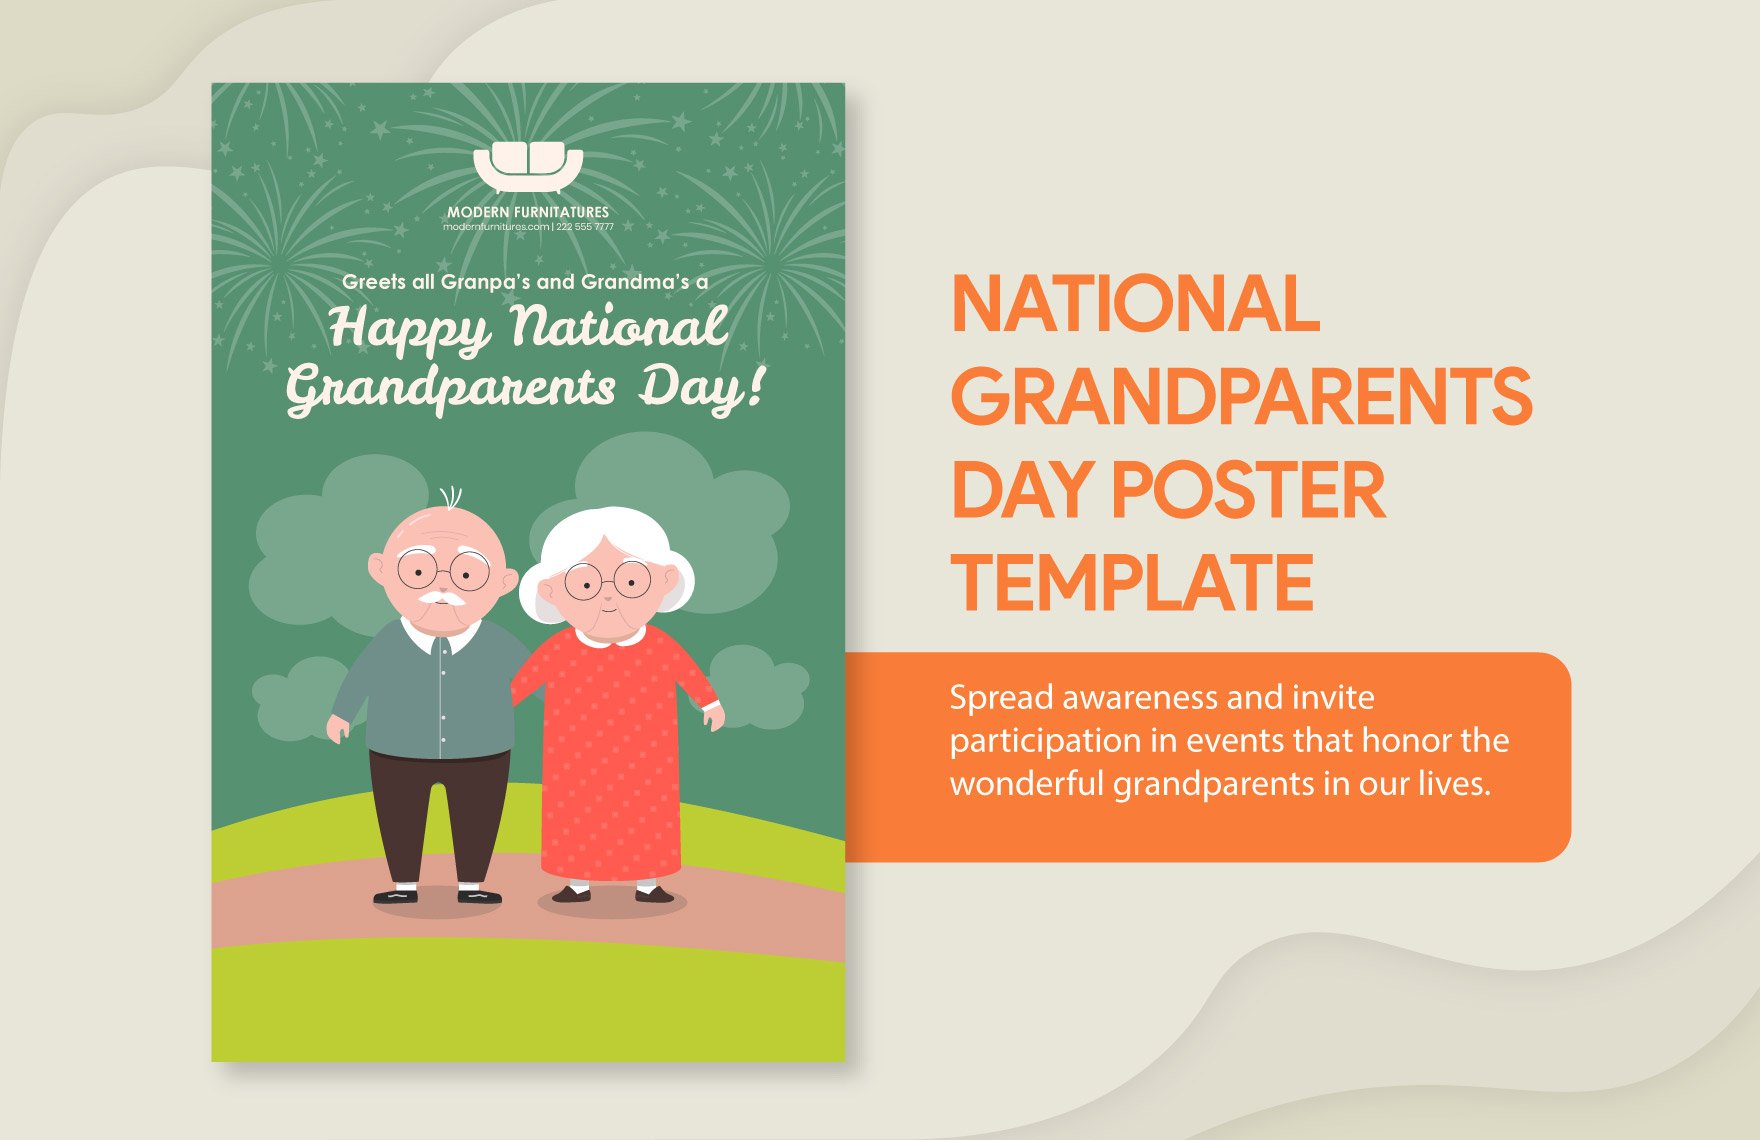 Free National Grandparents Day Poster Template in Illustrator, PSD, PNG